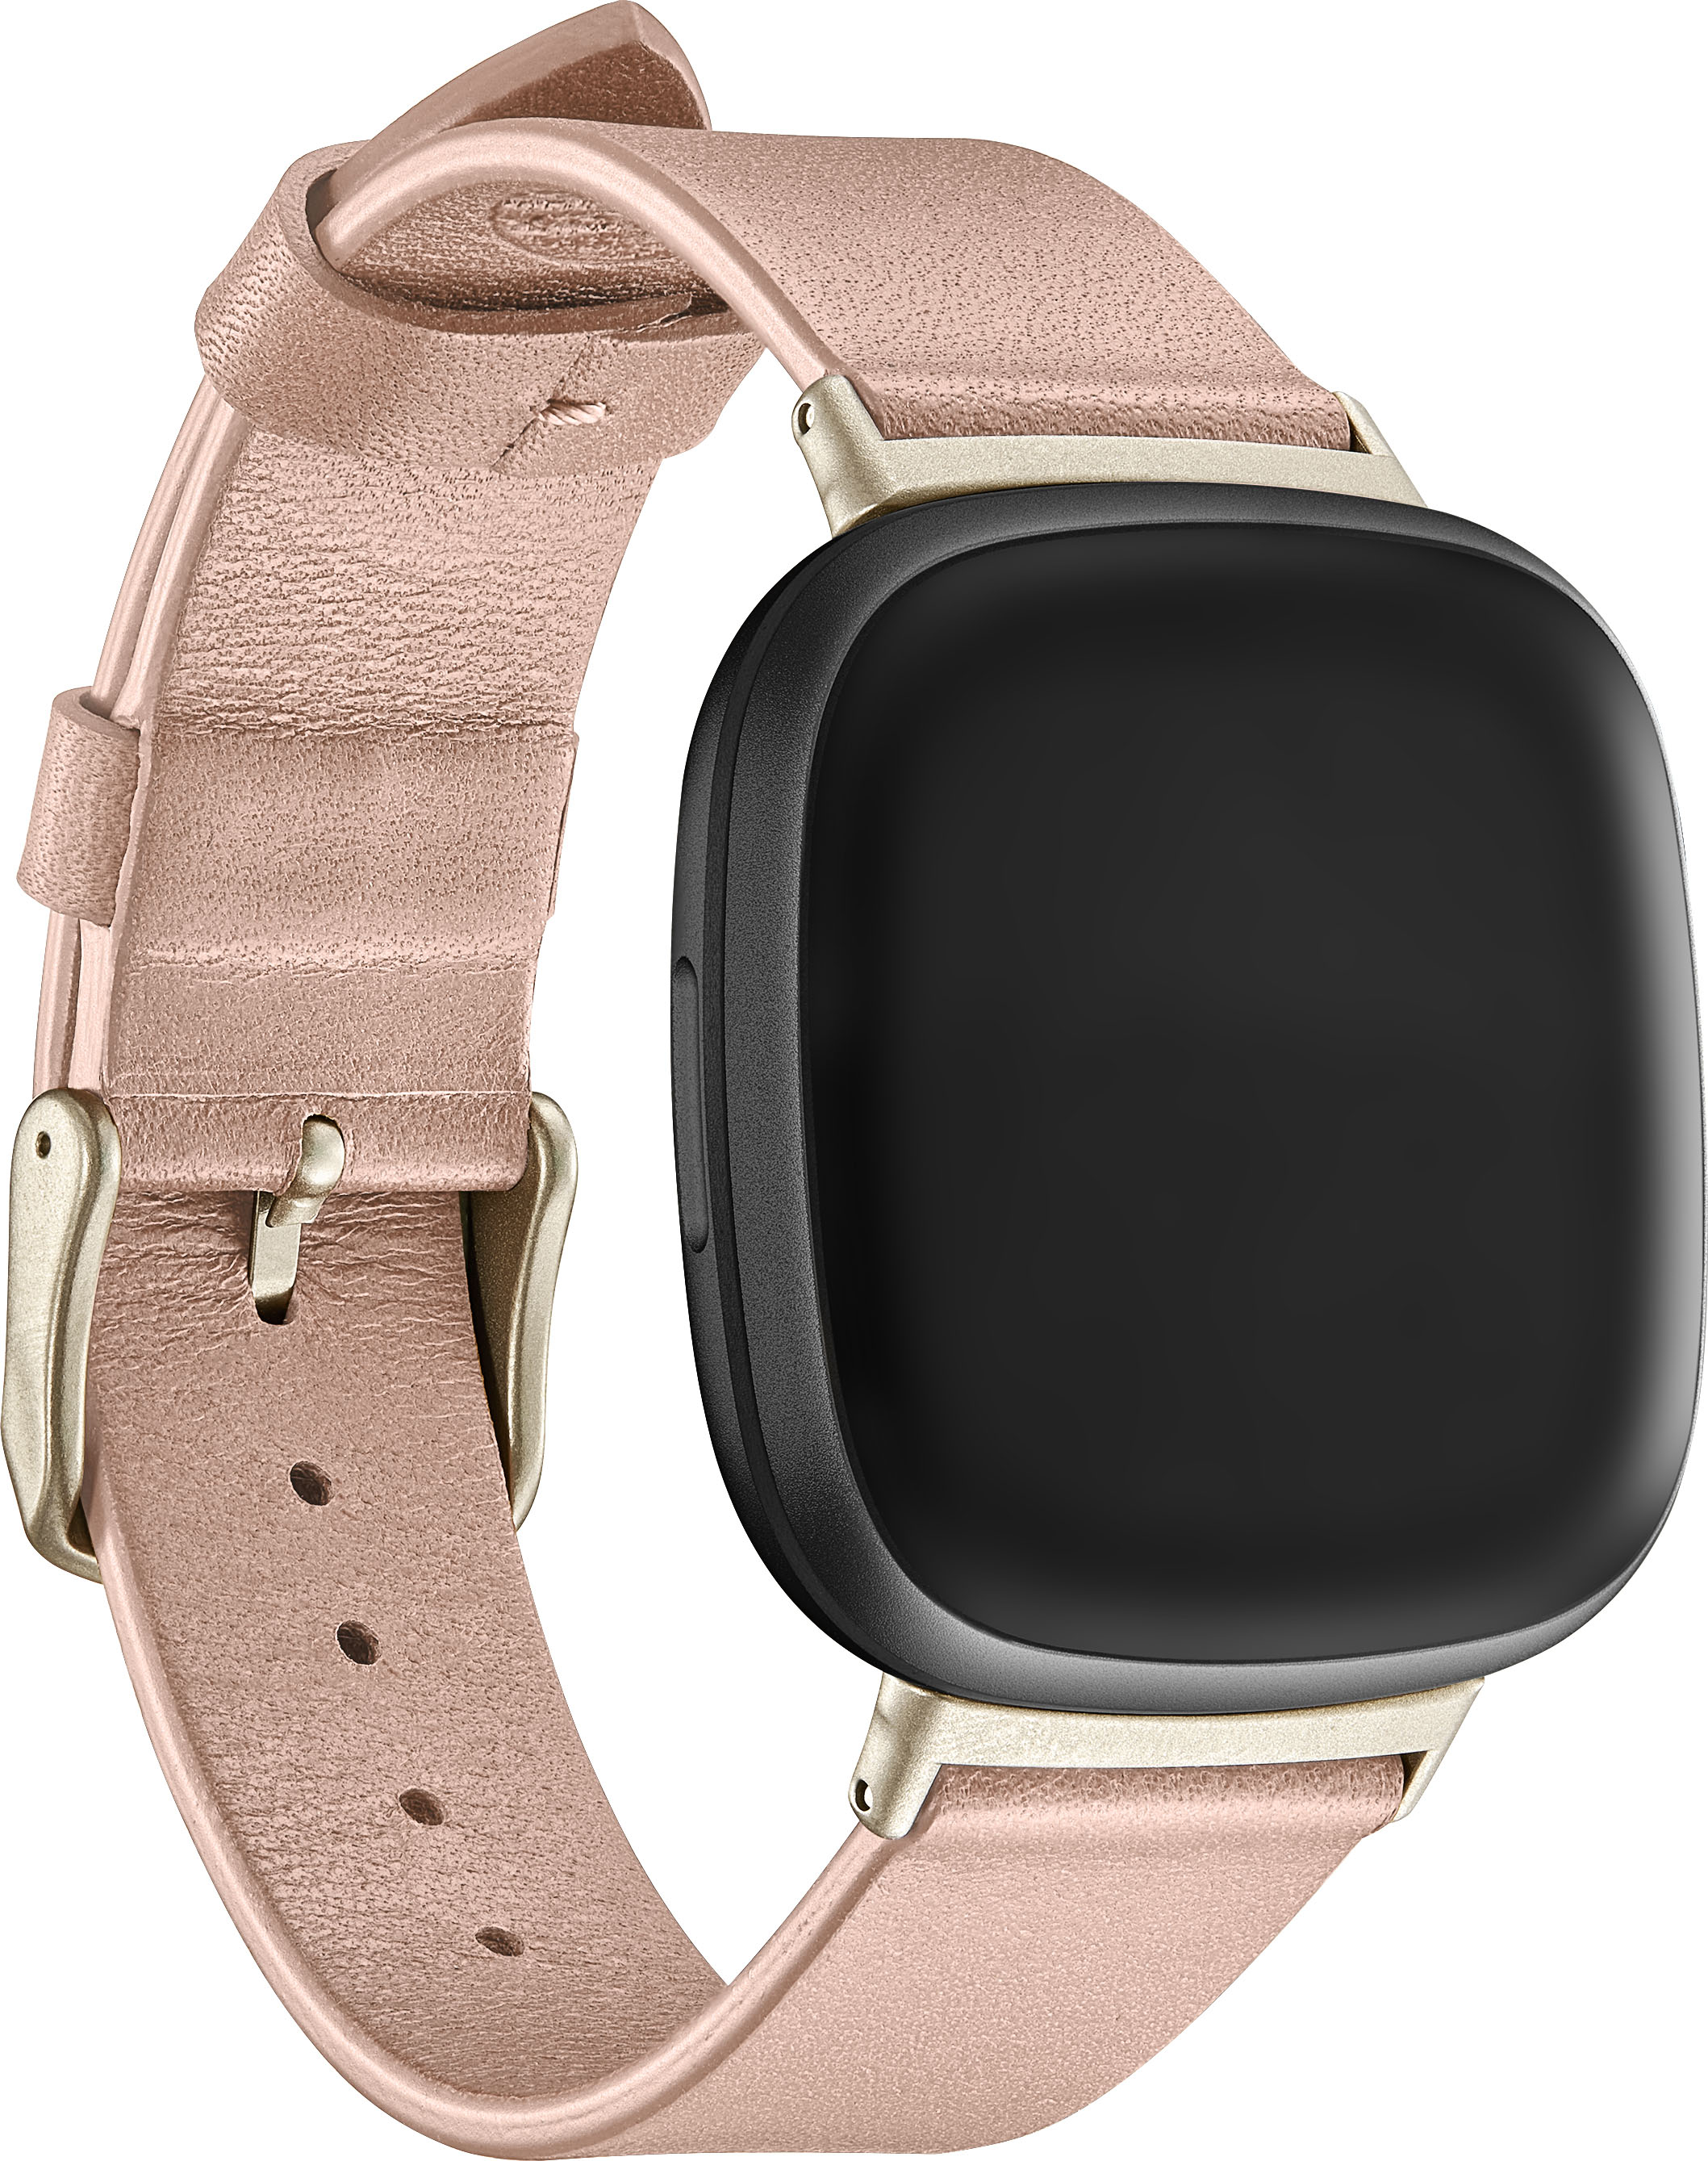 fitbit watches - Best Buy